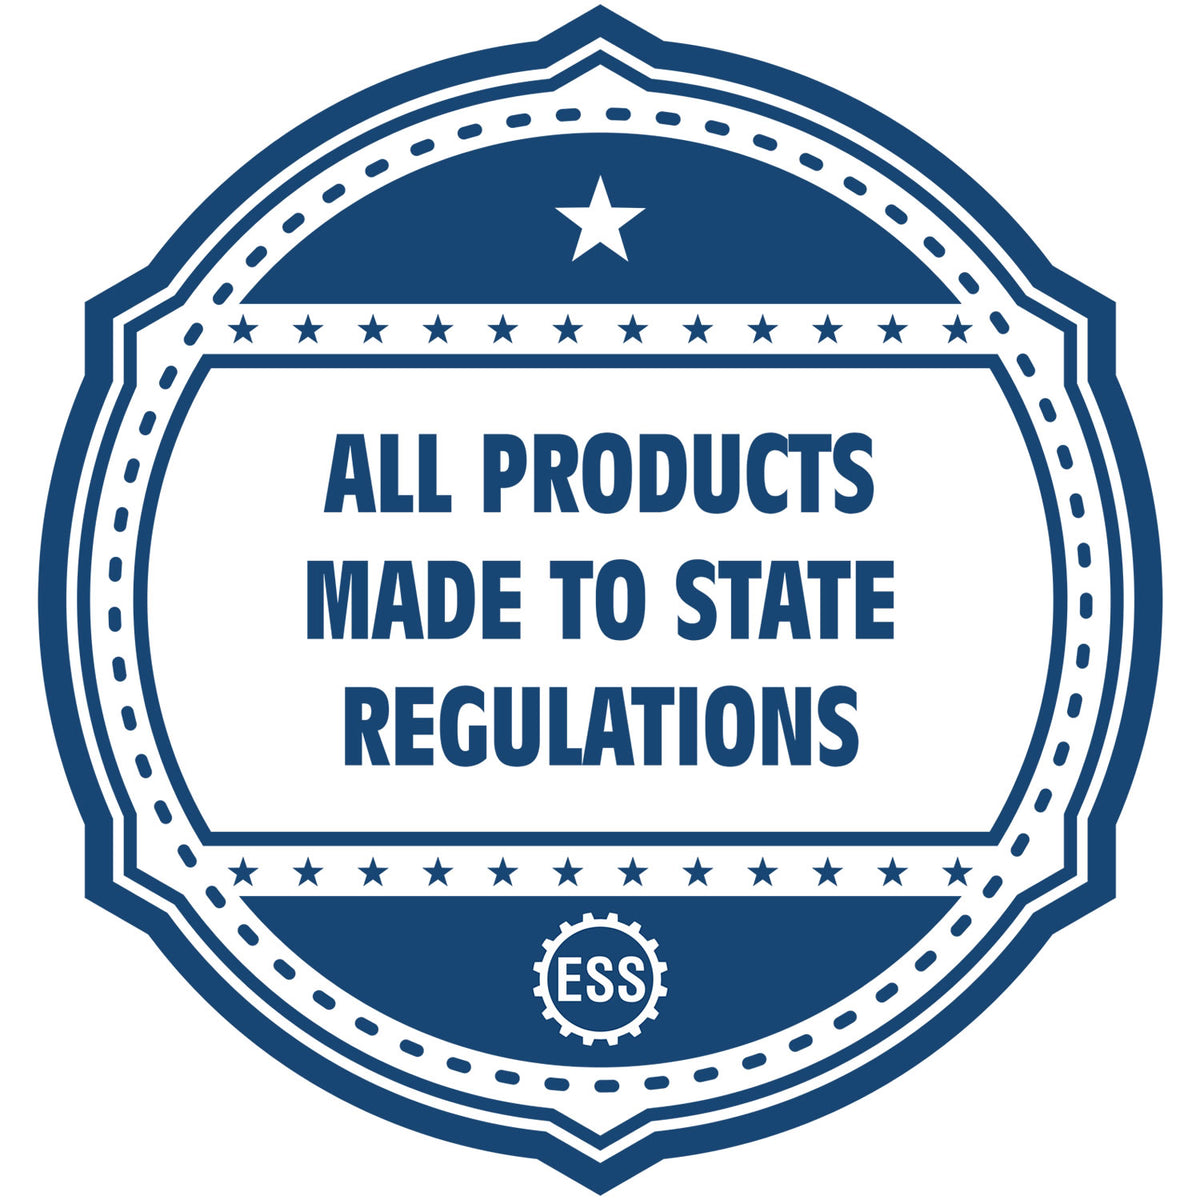 An icon or badge element for the Slim Pre-Inked Idaho Land Surveyor Seal Stamp showing that this product is made in compliance with state regulations.